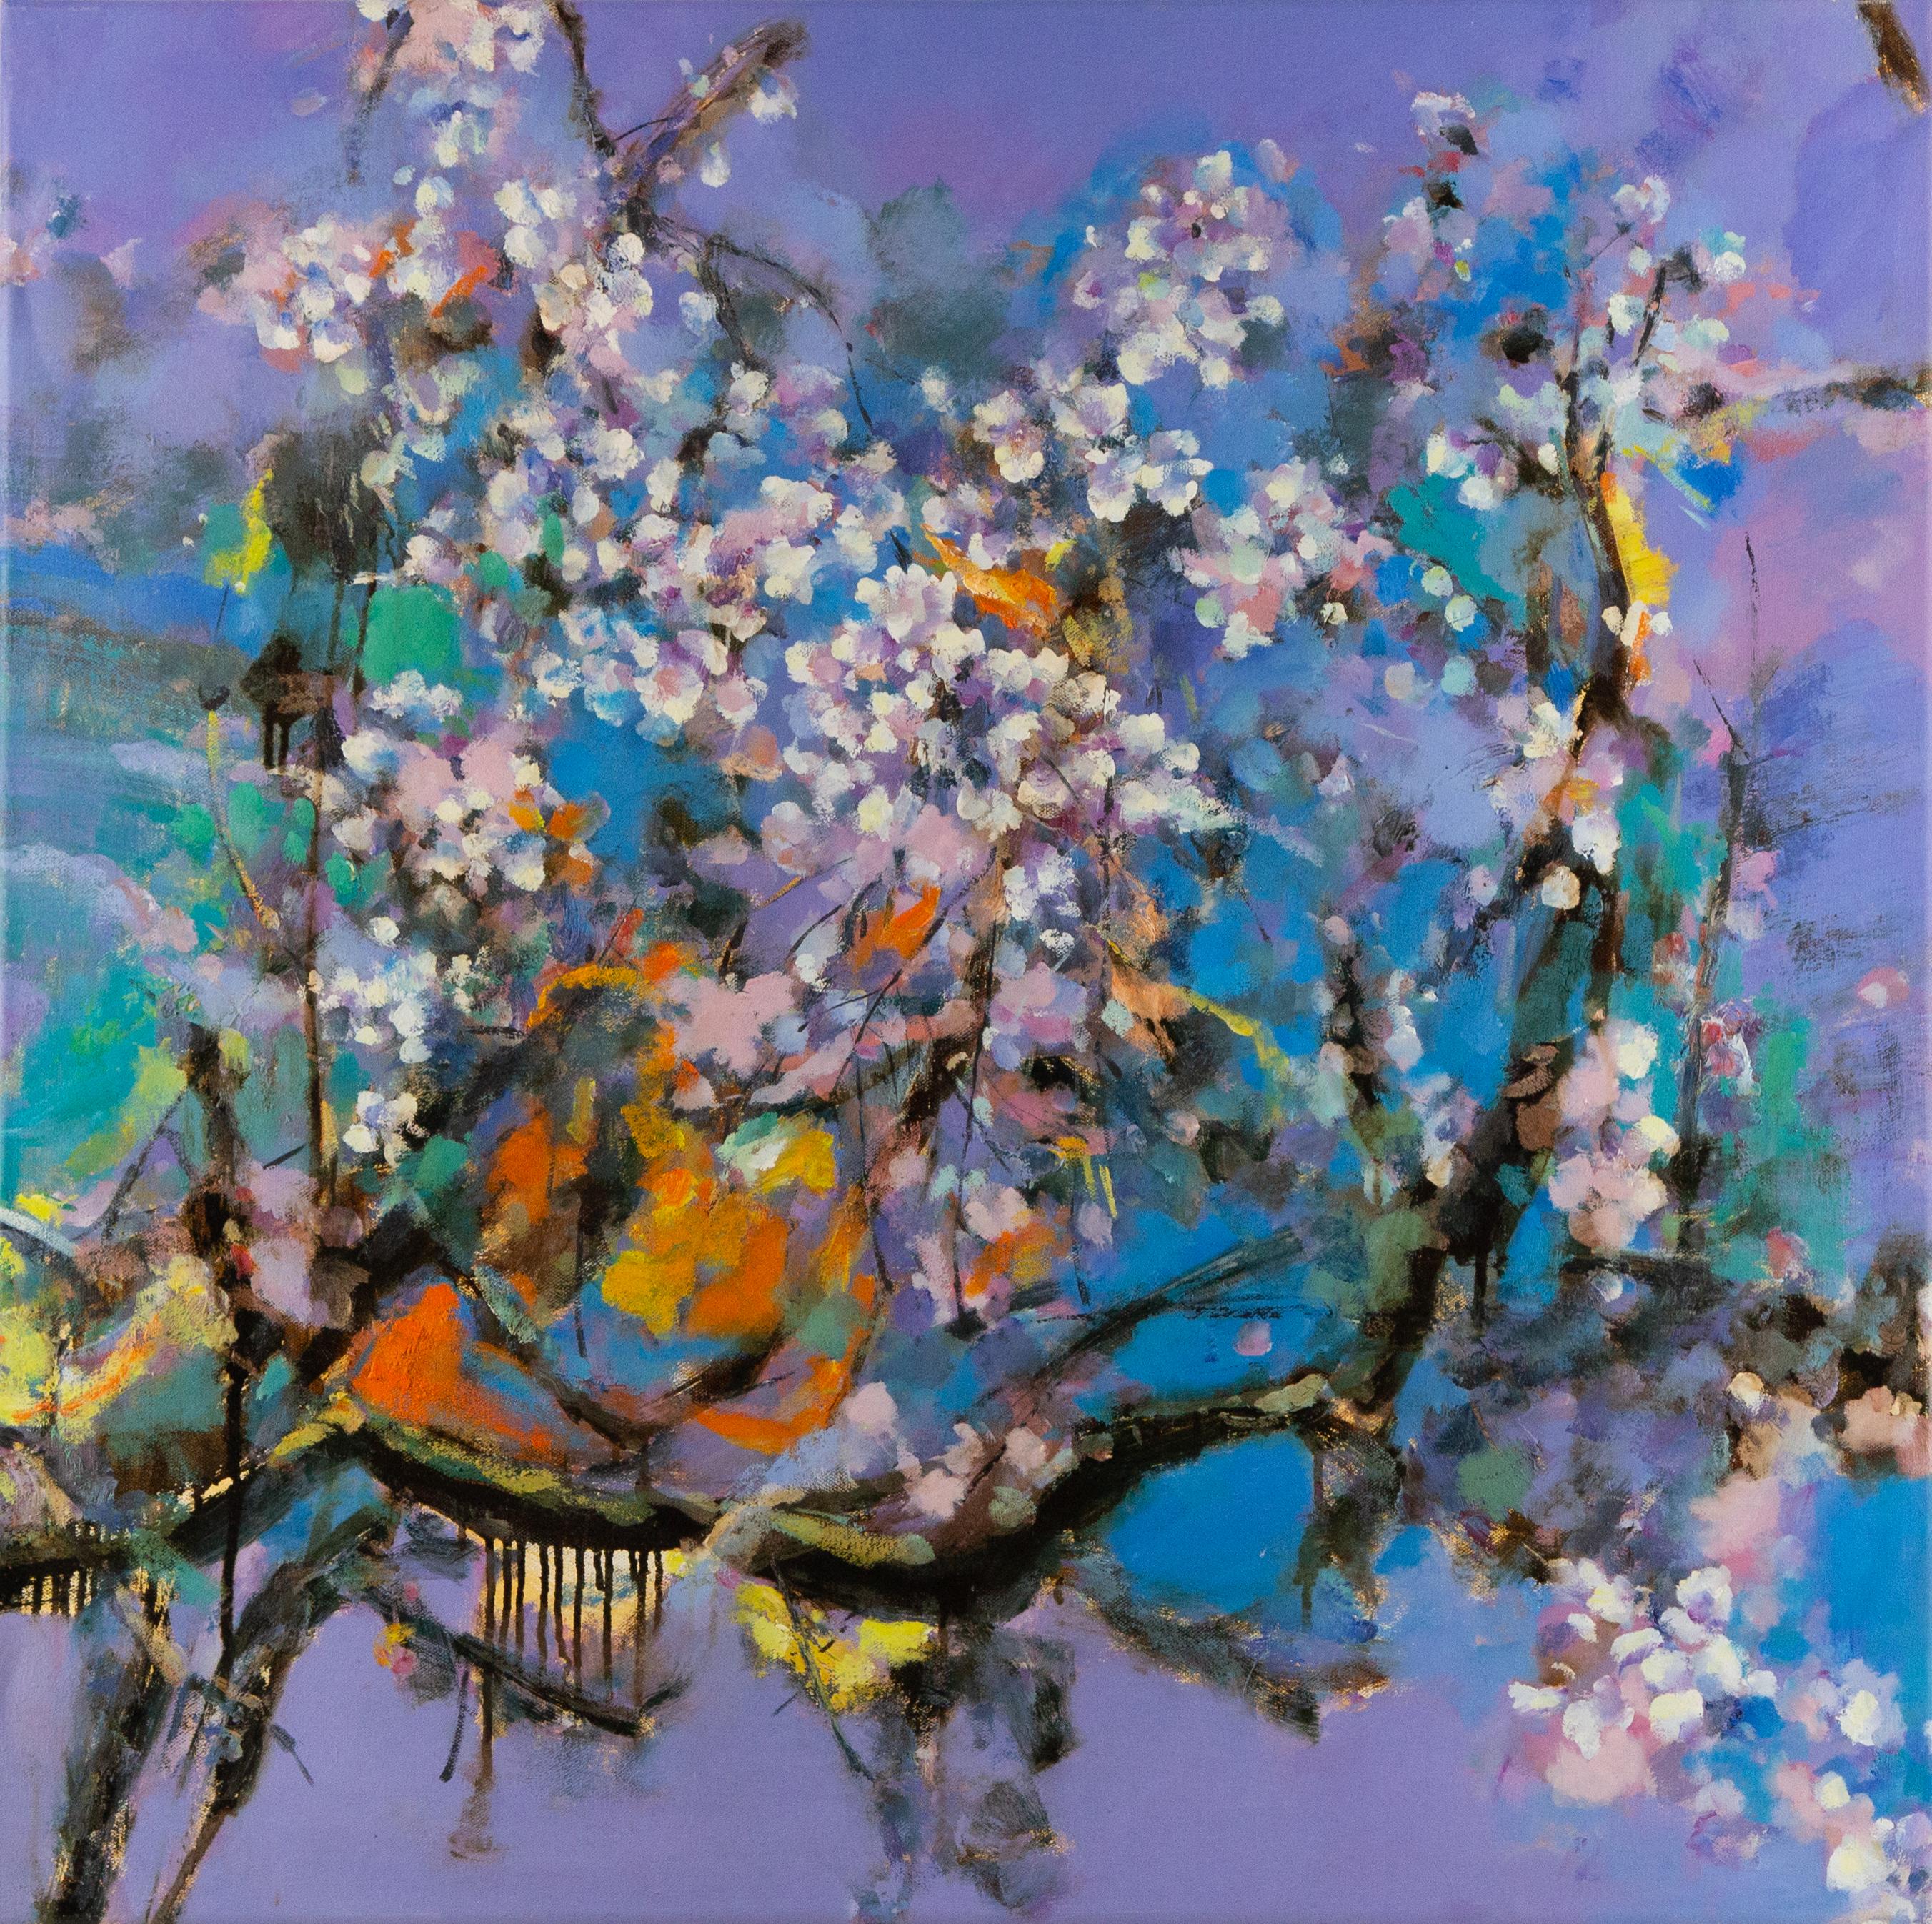  Title: Blooming Flower
 Medium: Oil on canvas
 Size: 38 x 38 inches
 Frame: Framing options available!
 Note: This painting is unstretched
 Year: 2000 Circa
 Artist: Dejun Chen
 Signature: Unsigned
 Signature Location: N/A
 Provenance: Direct from